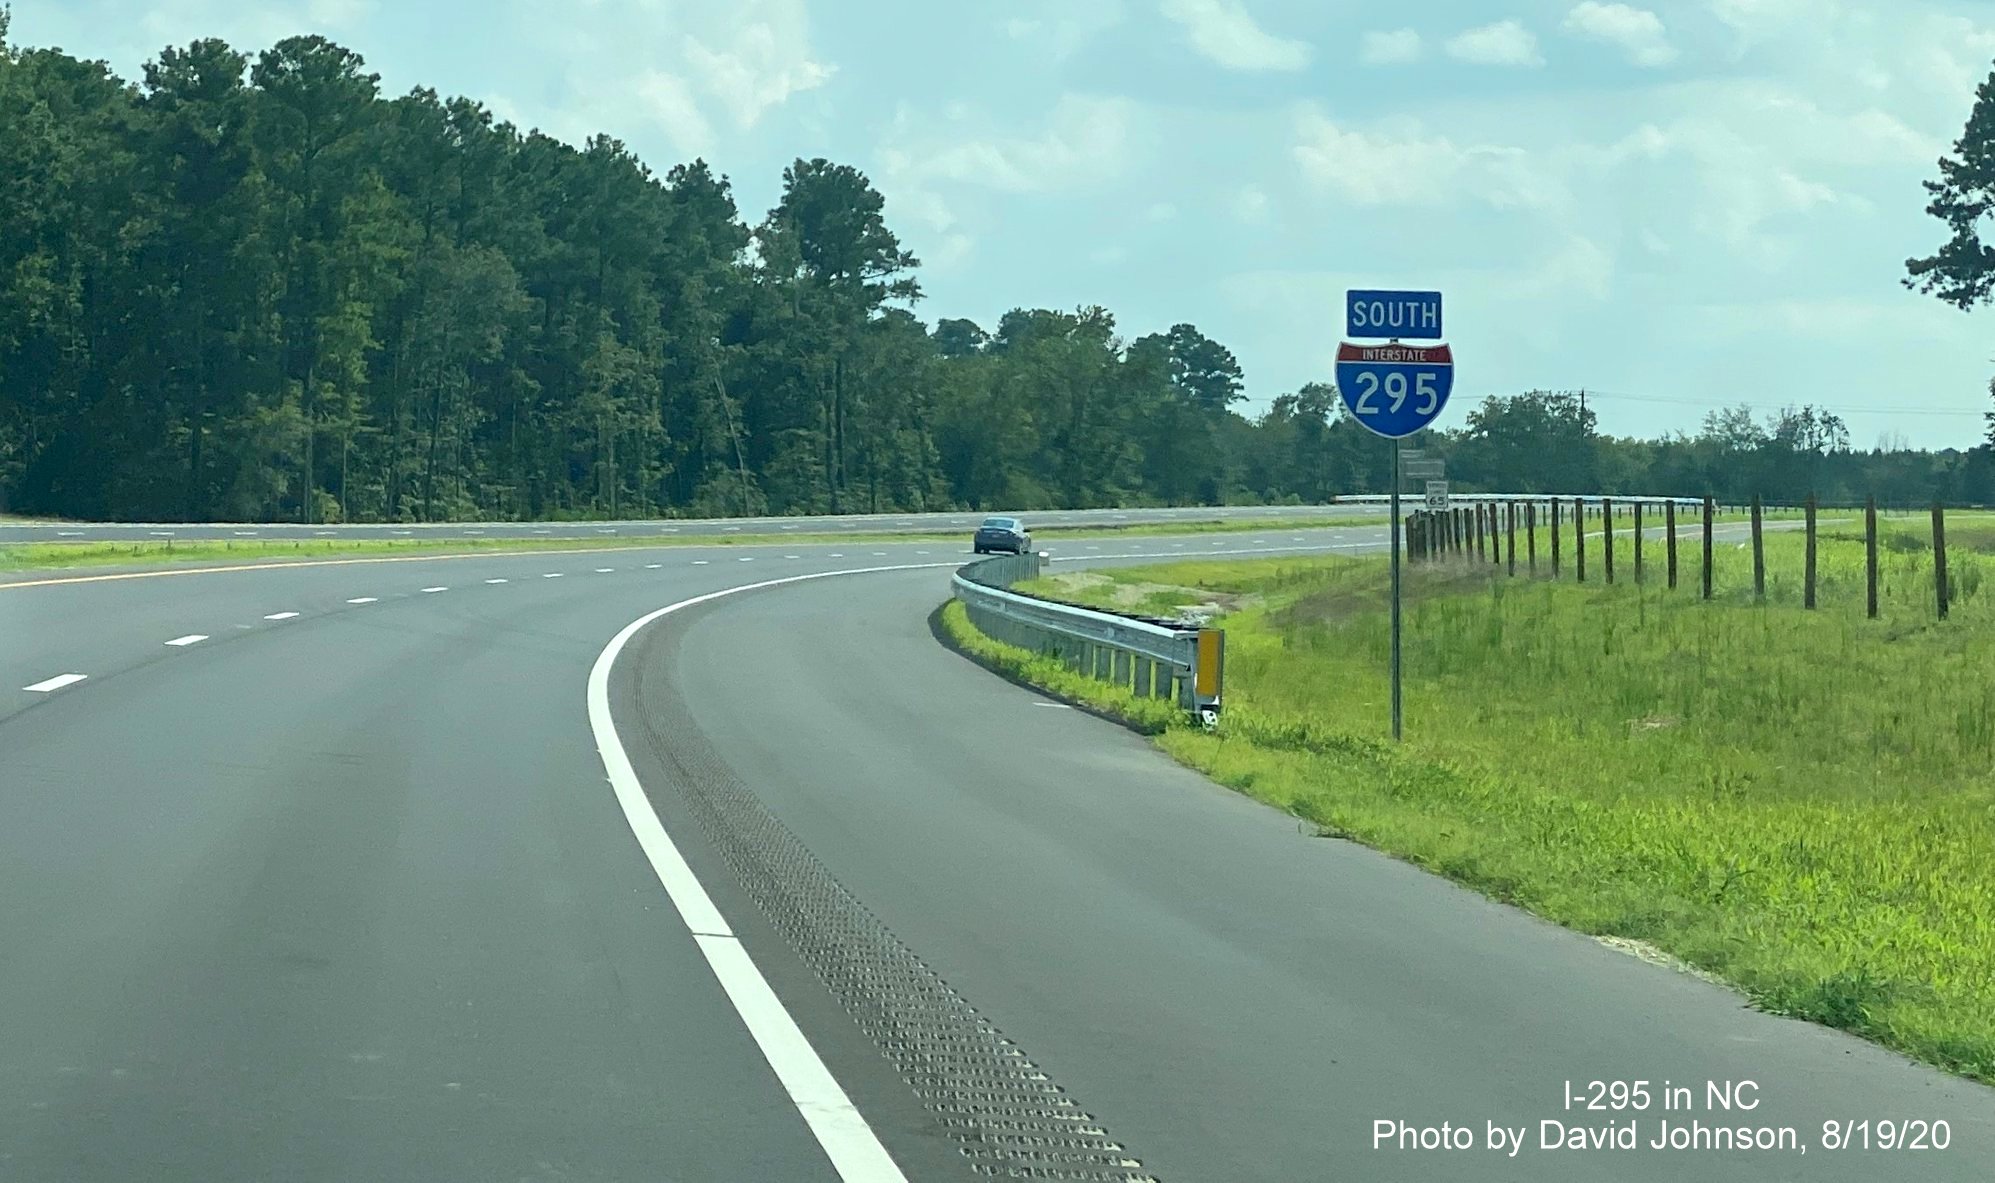 Image of I-295 South Reassurance Marker after Cliffdale Road exit in Fayetteville, by David Johnson August 2020